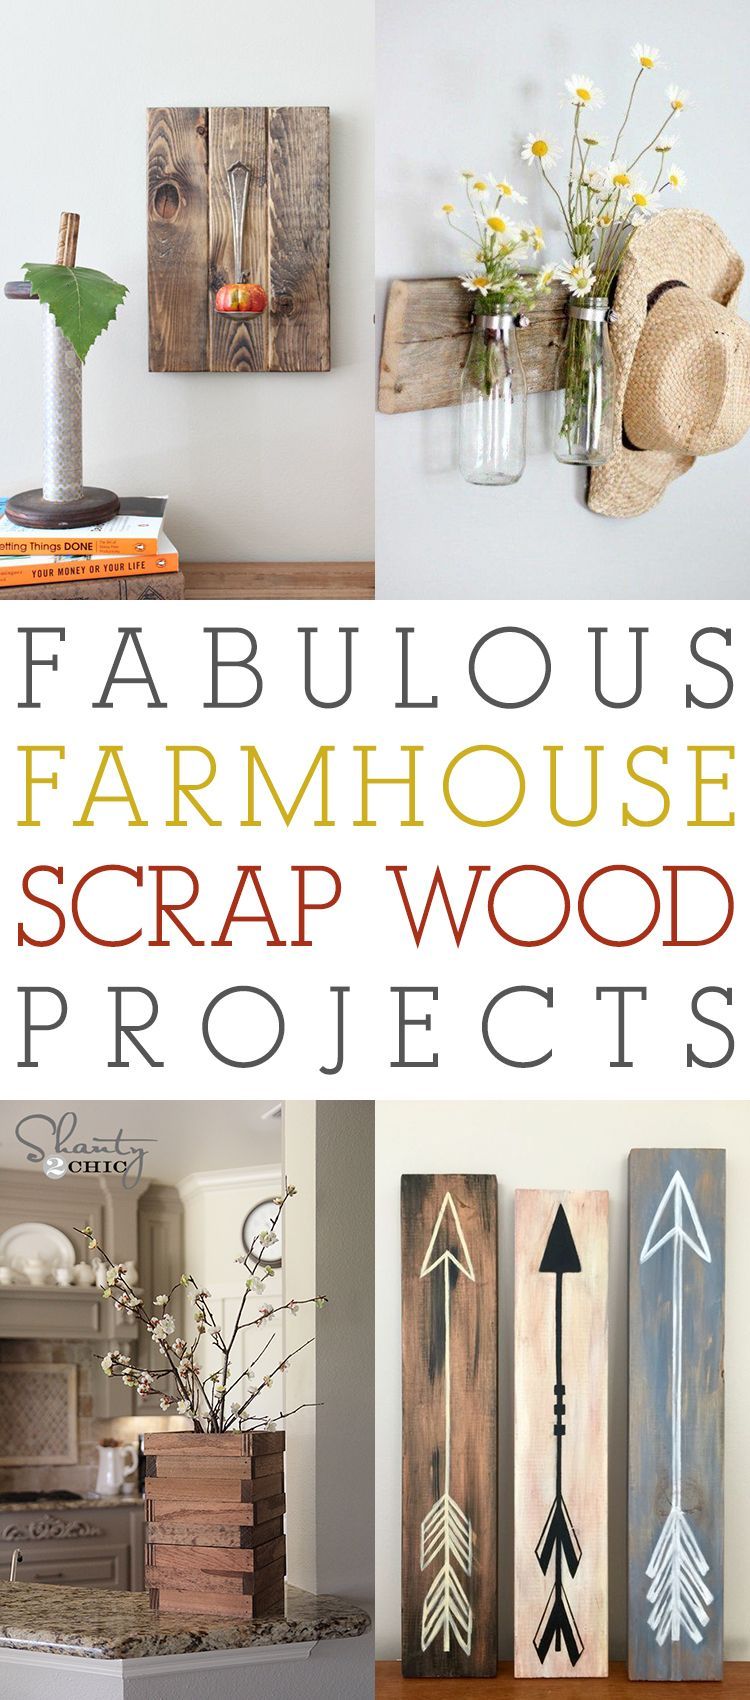 Fabulous Farmhouse Scrap Wood Projects - The Cottage Market -   15 diy projects With Wood scraps ideas